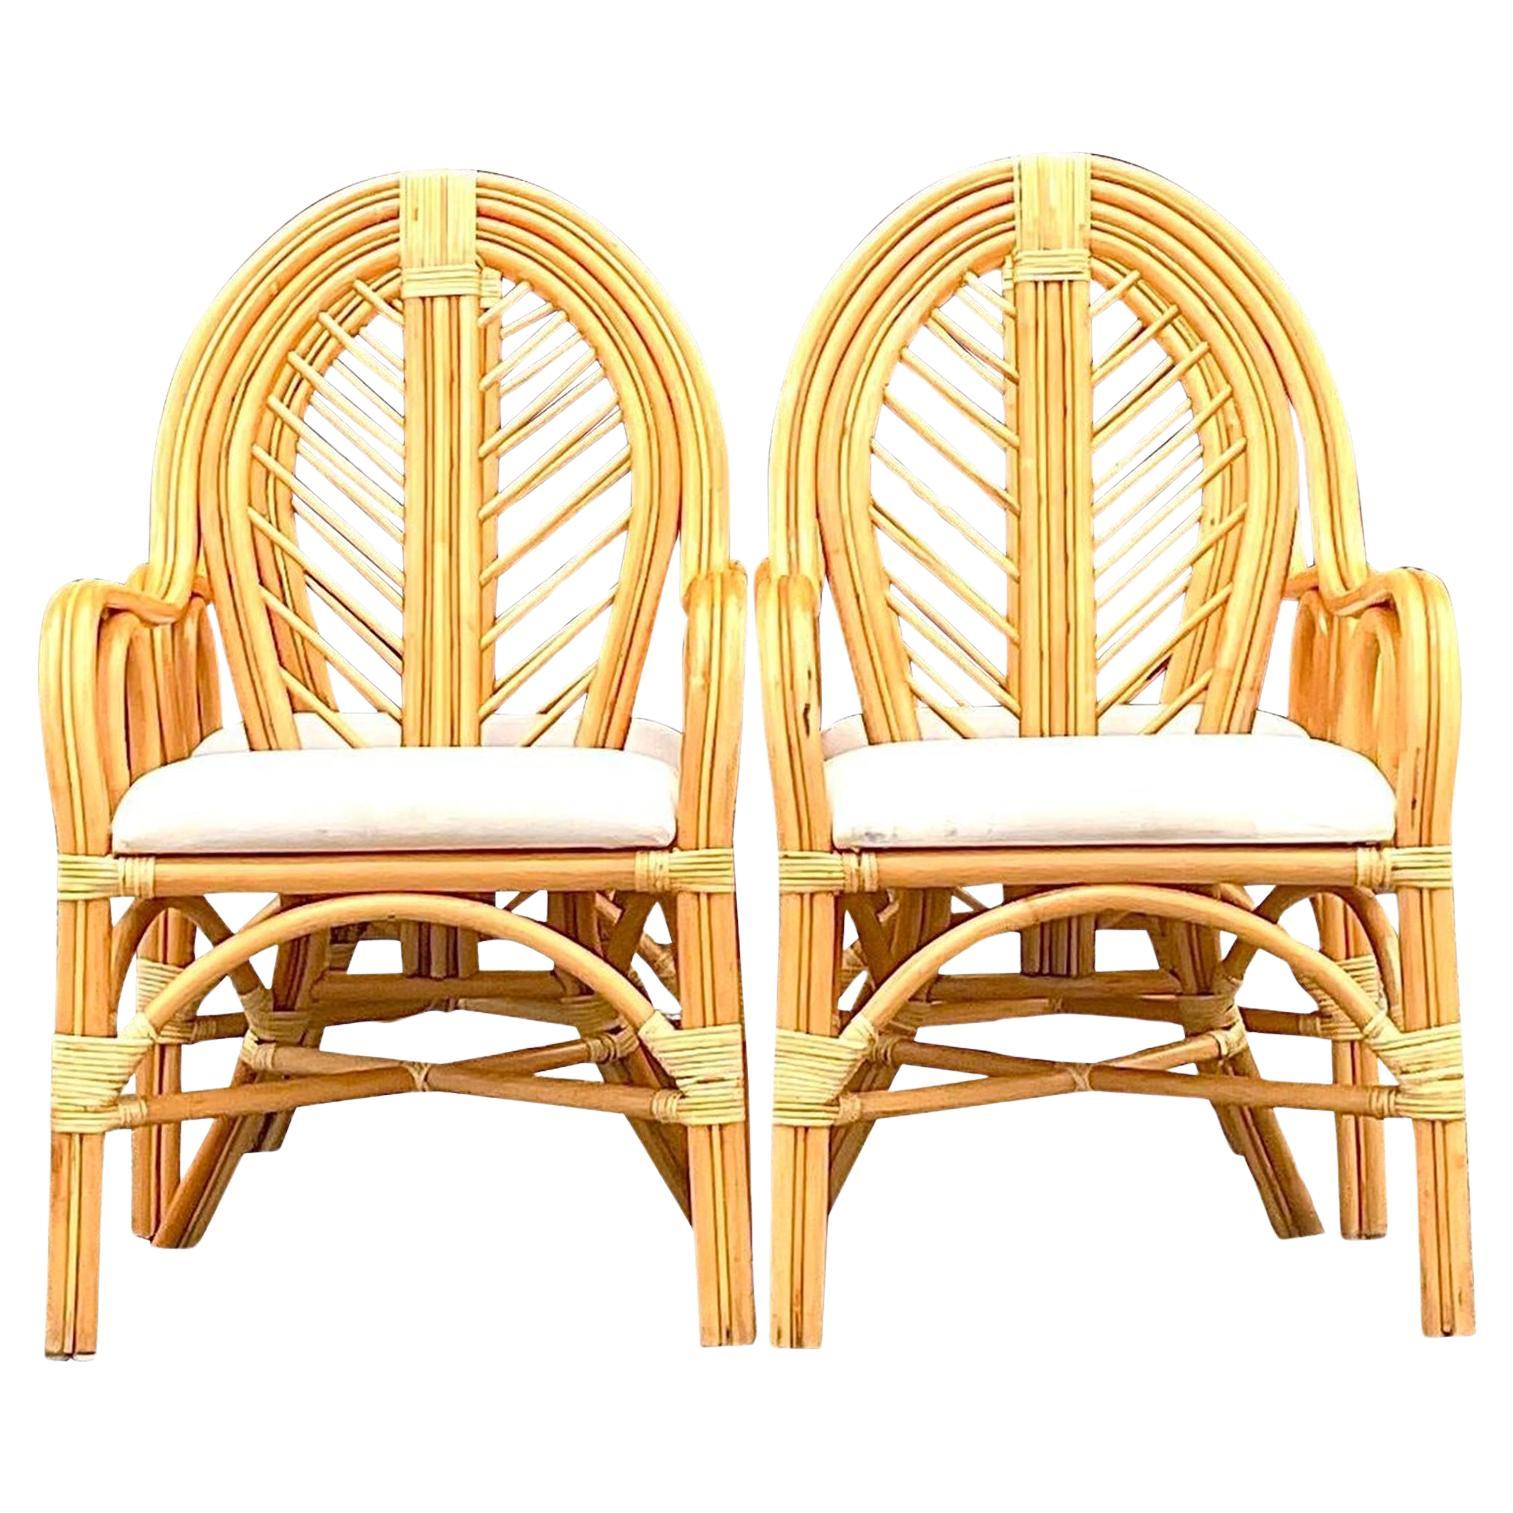 Vintage Coastal Bent Rattan Dining Chairs - Set of 4 For Sale